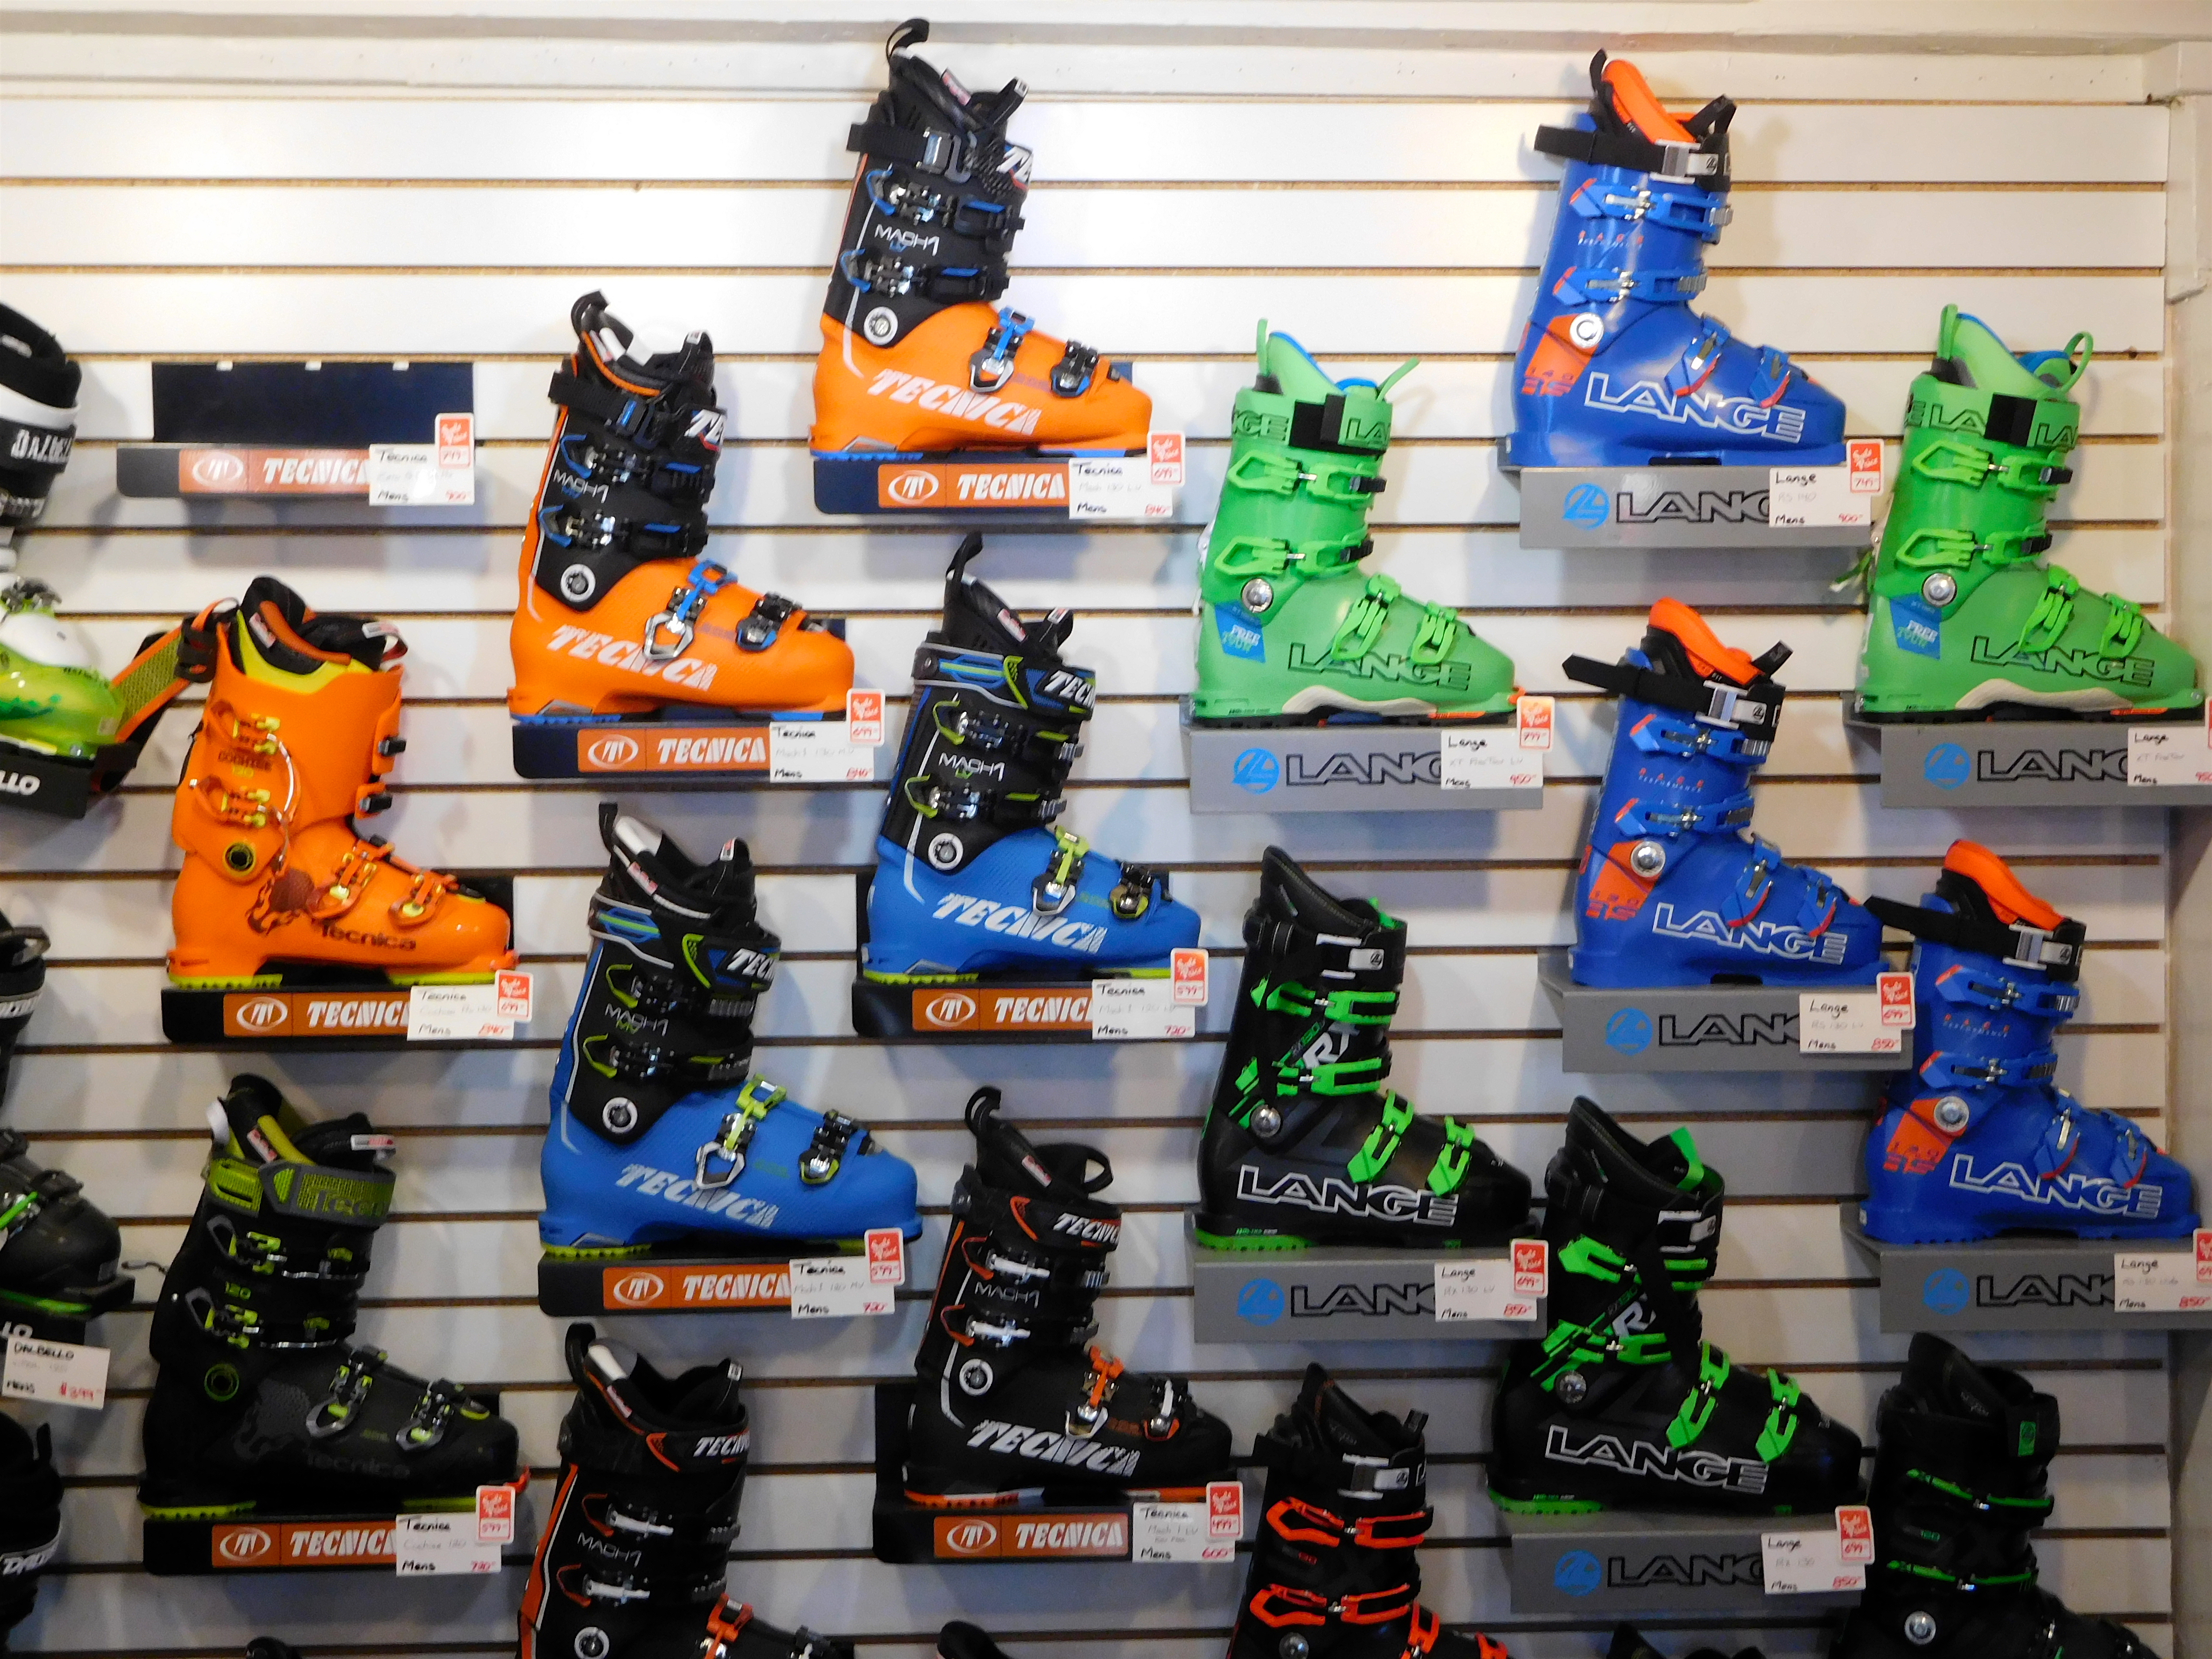 Boots galore at Olympic Bootworks. 